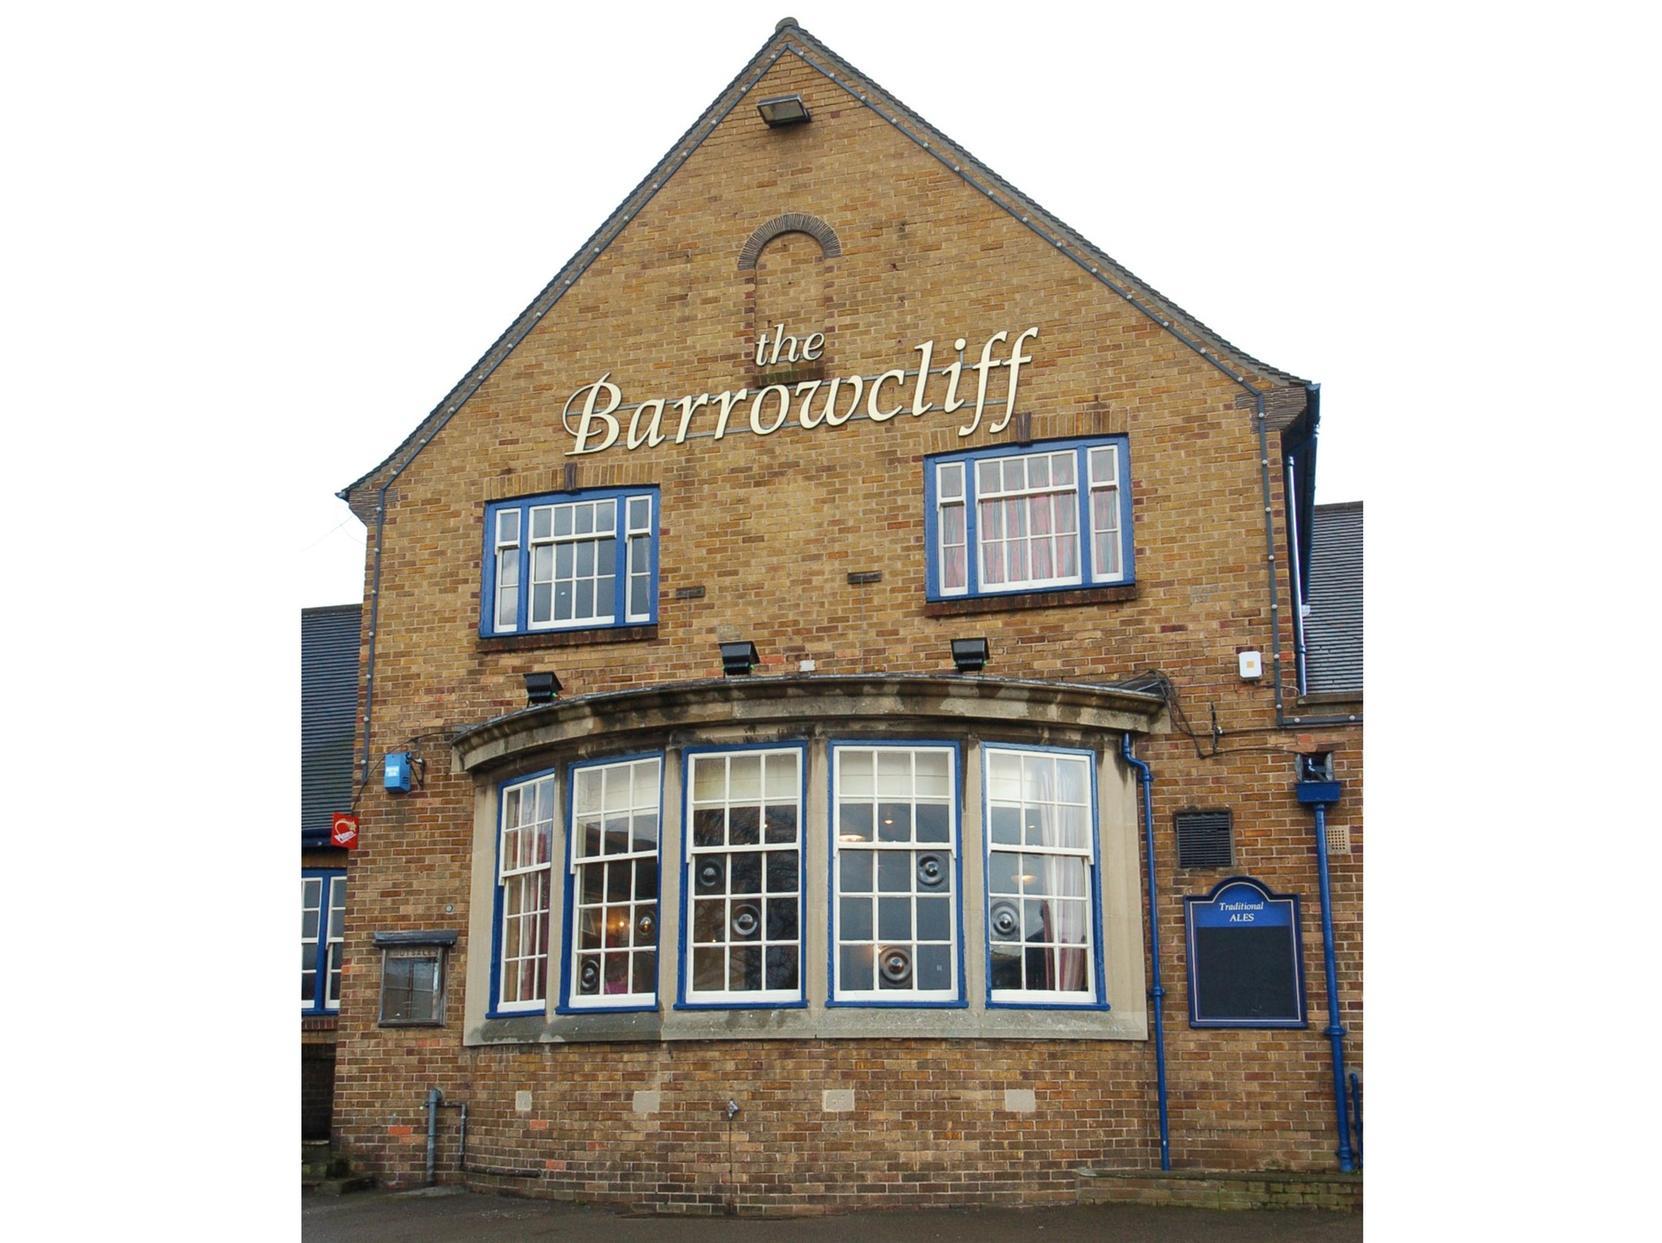 The Barrowcliff, on Barrowcliff Road, closed in 2007 after a campaign by residents to try and keep it open.